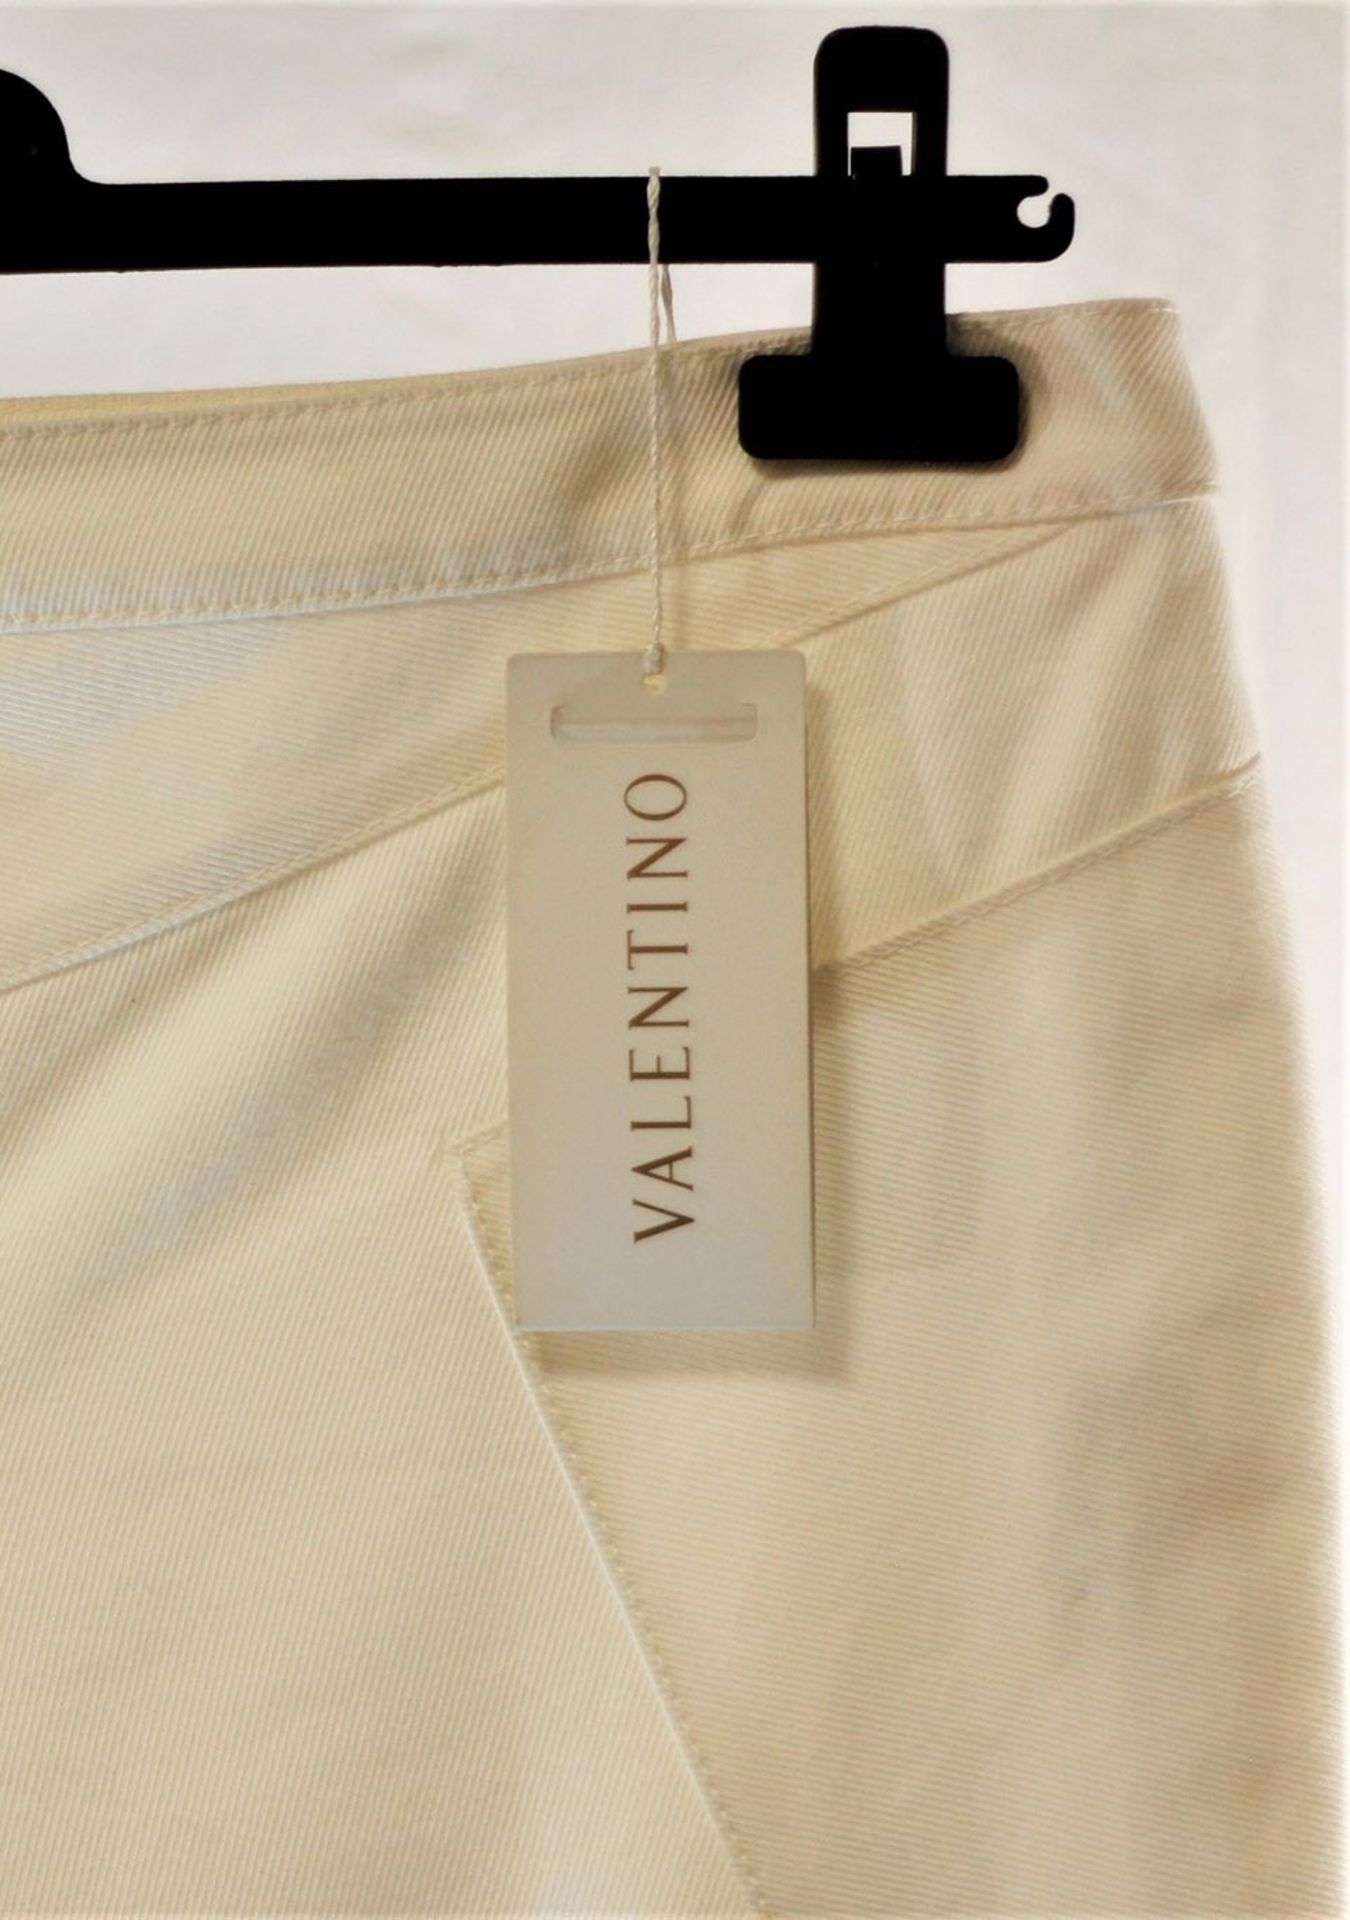 1 x Valentino Cream Trousers - Size: 14 - Material: 98% Cotton, 2% Elastane. Lining 100% Polyester - - Image 2 of 5